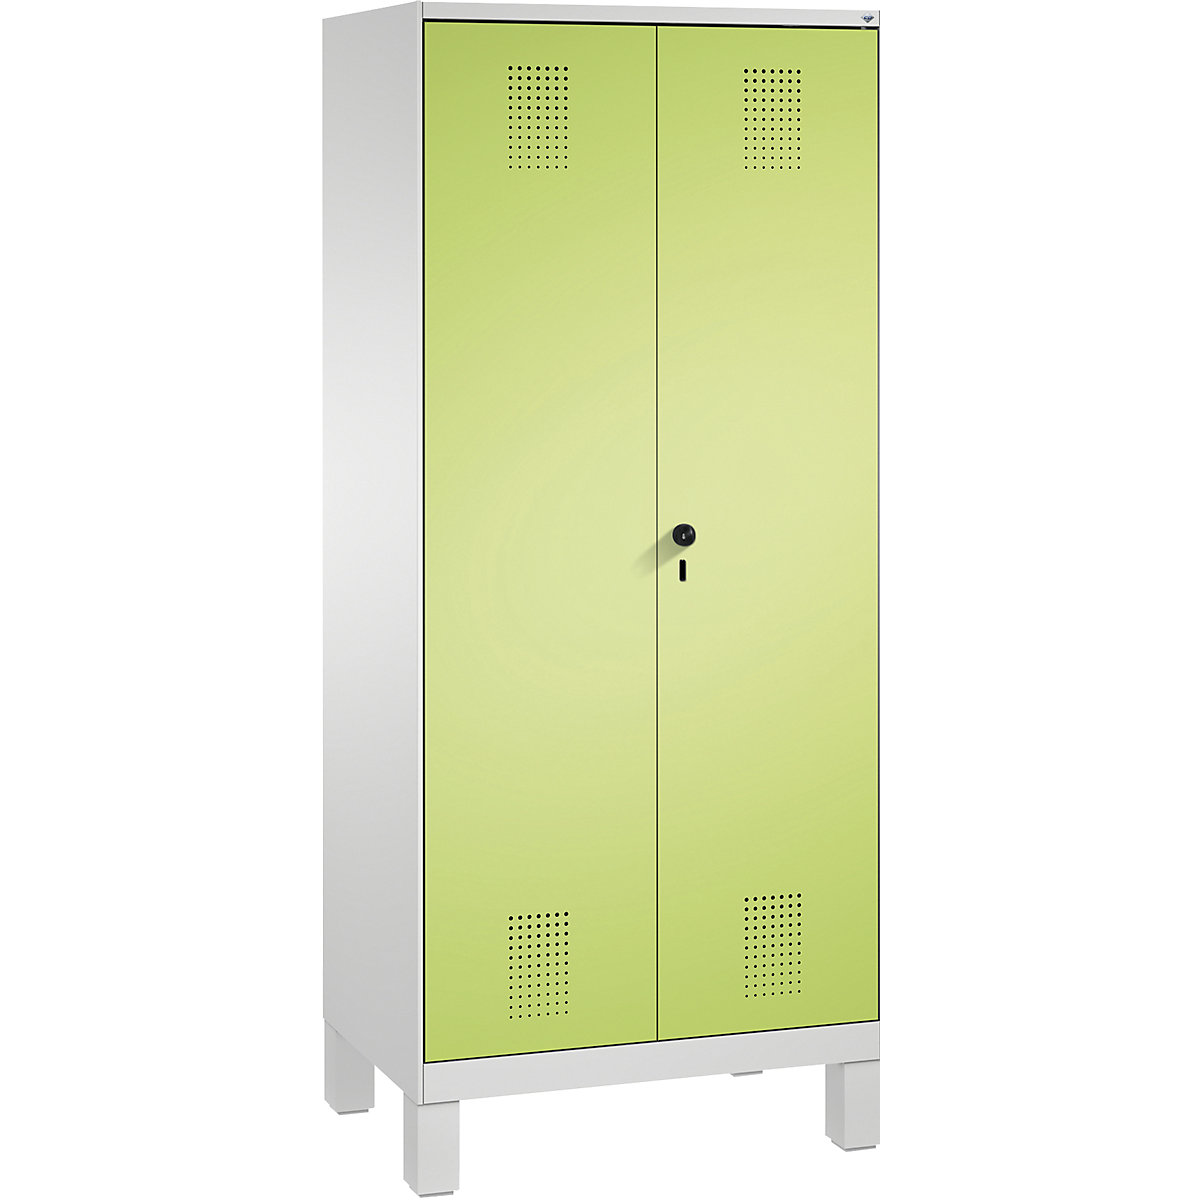 EVOLO cloakroom locker, doors close in the middle – C+P, 2 compartments, compartment width 400 mm, with feet, light grey / viridian green-6